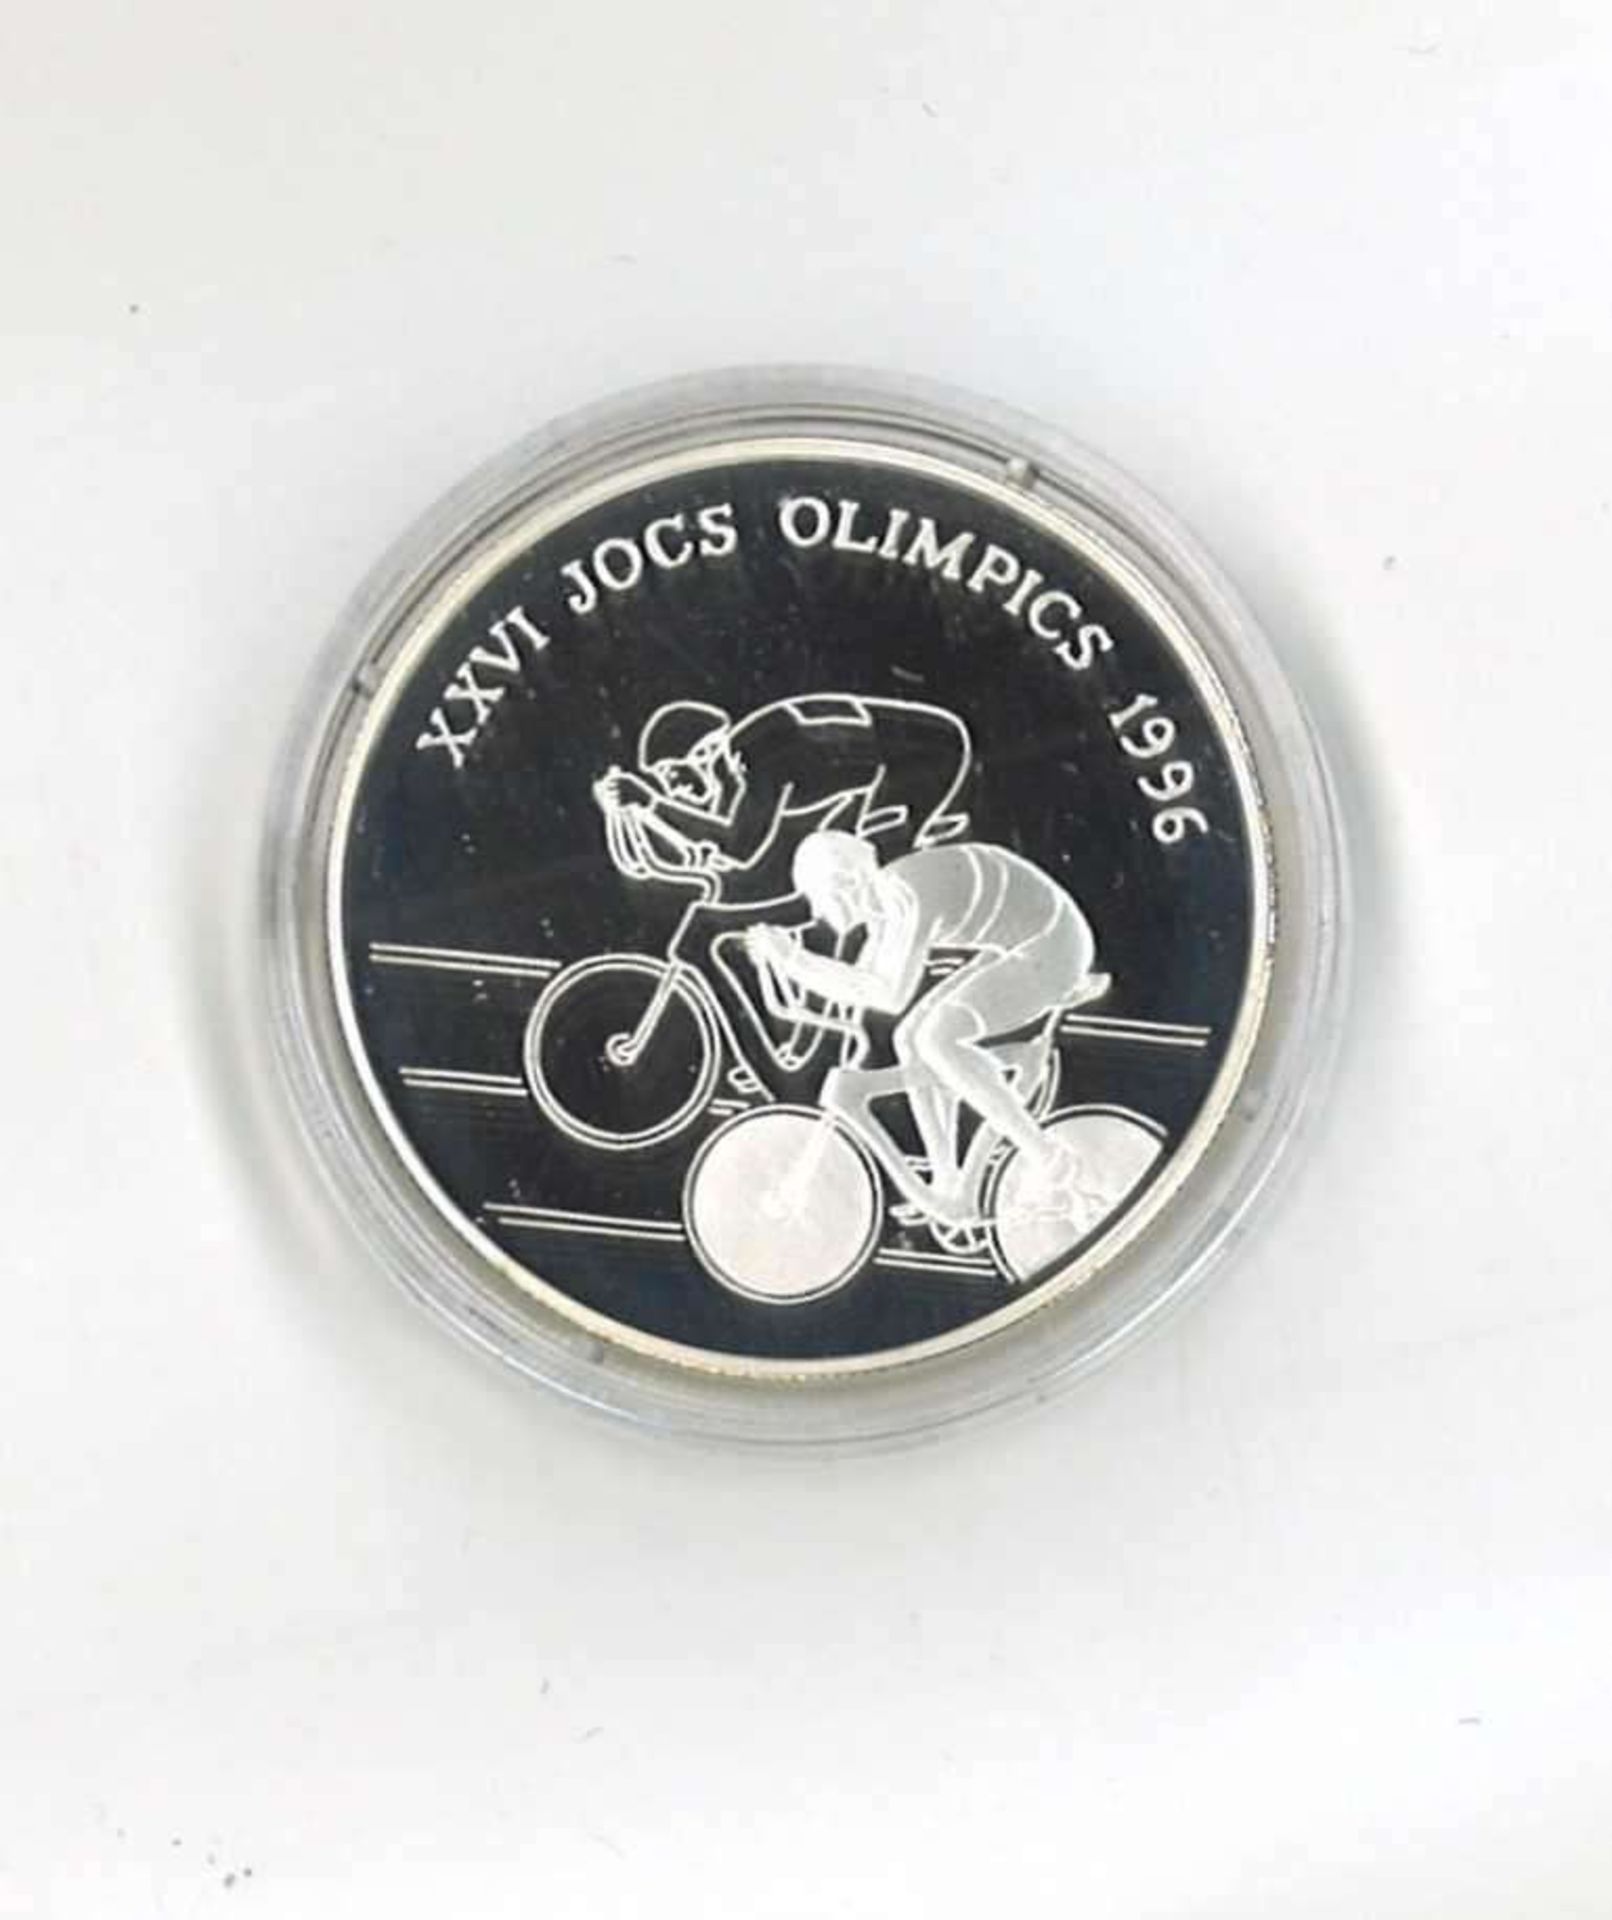 Olympische Spiele Andorra, 10 Diners, 925/1000 Silber. RadrennenOlympic Games Andorra, 10 diners, 9